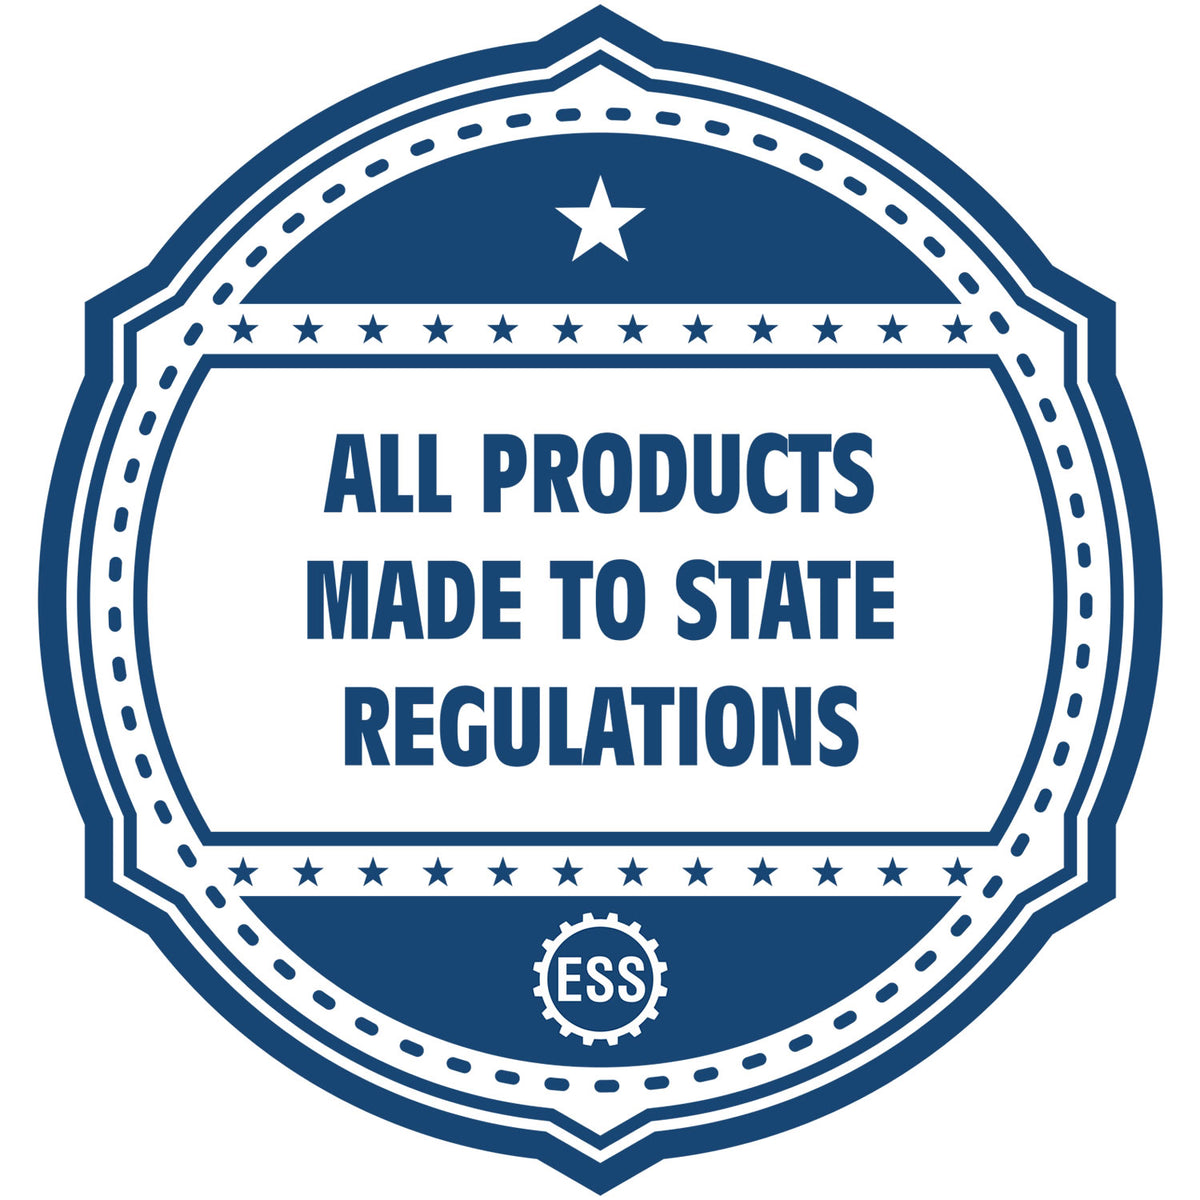 An icon or badge element for the Illinois Desk Architect Embossing Seal showing that this product is made in compliance with state regulations.